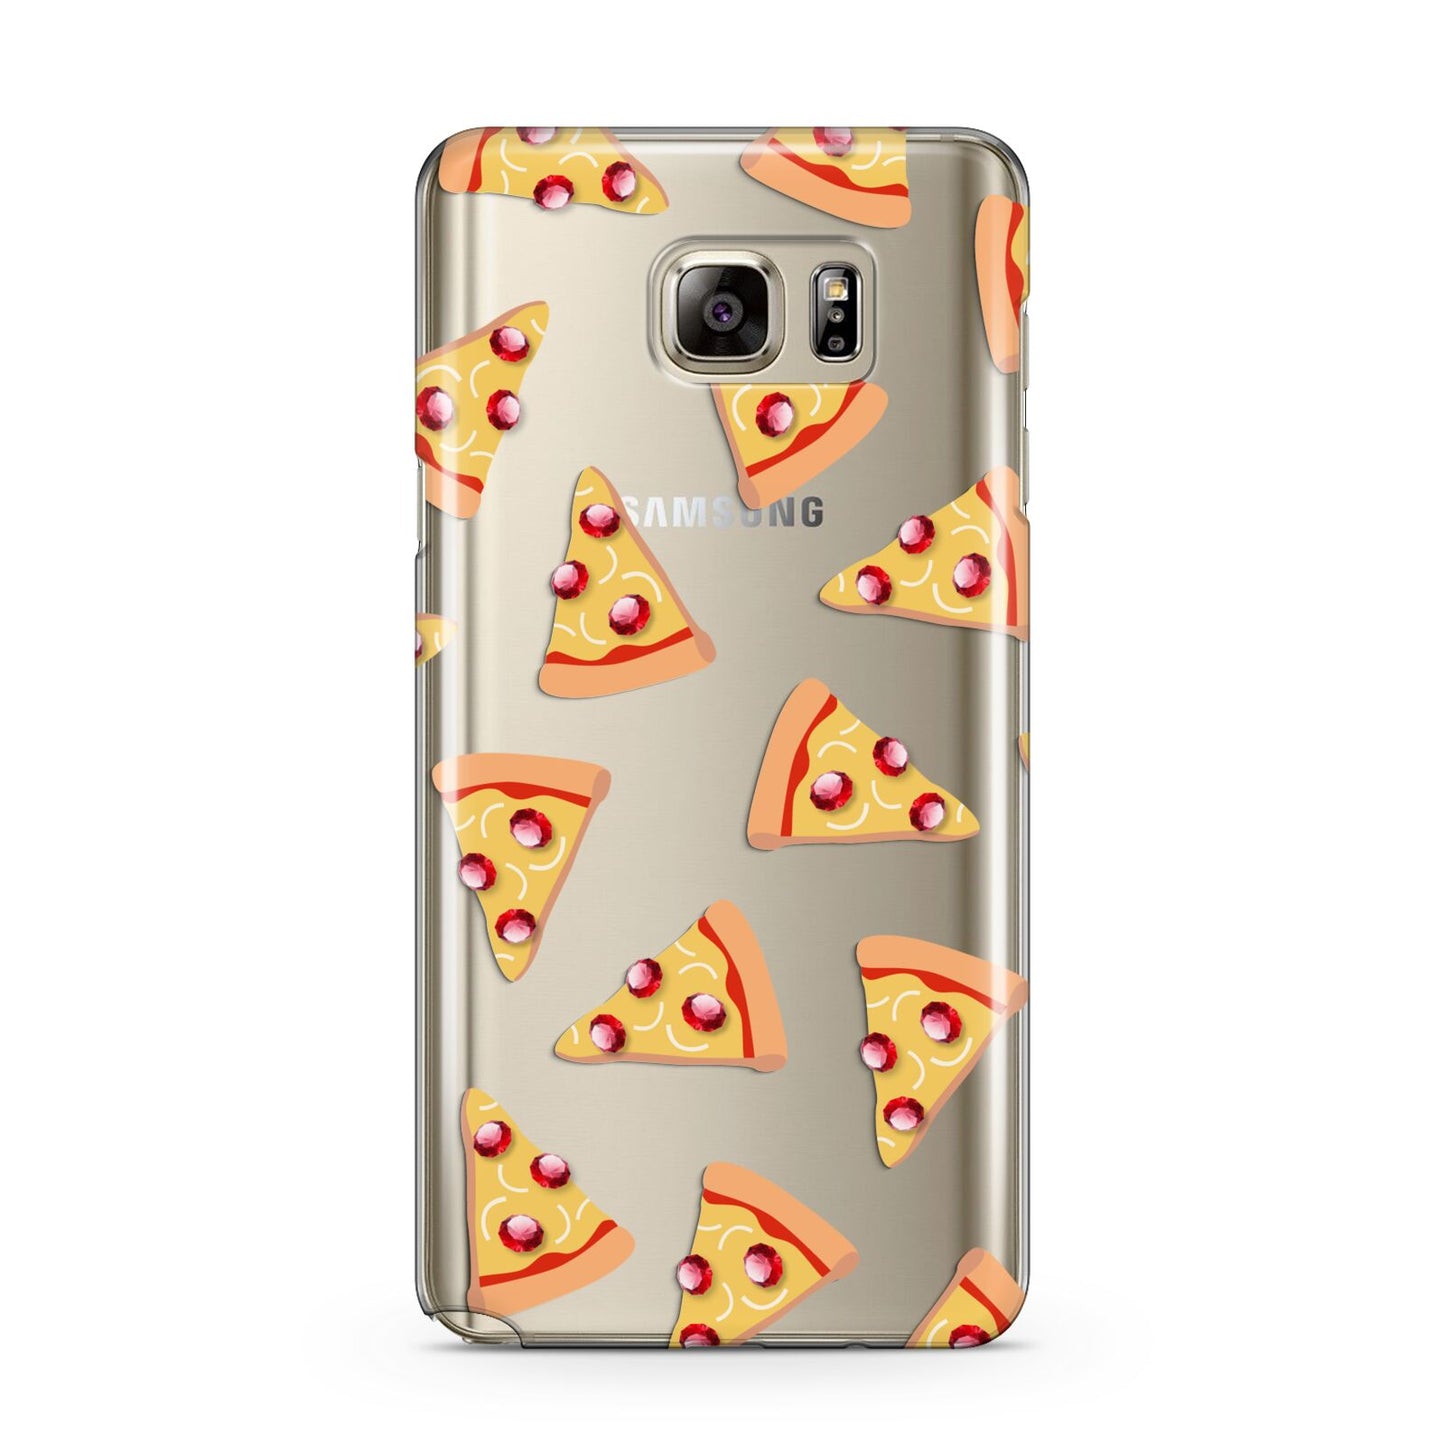 Rubies on Cartoon Pizza Slices Samsung Galaxy Note 5 Case